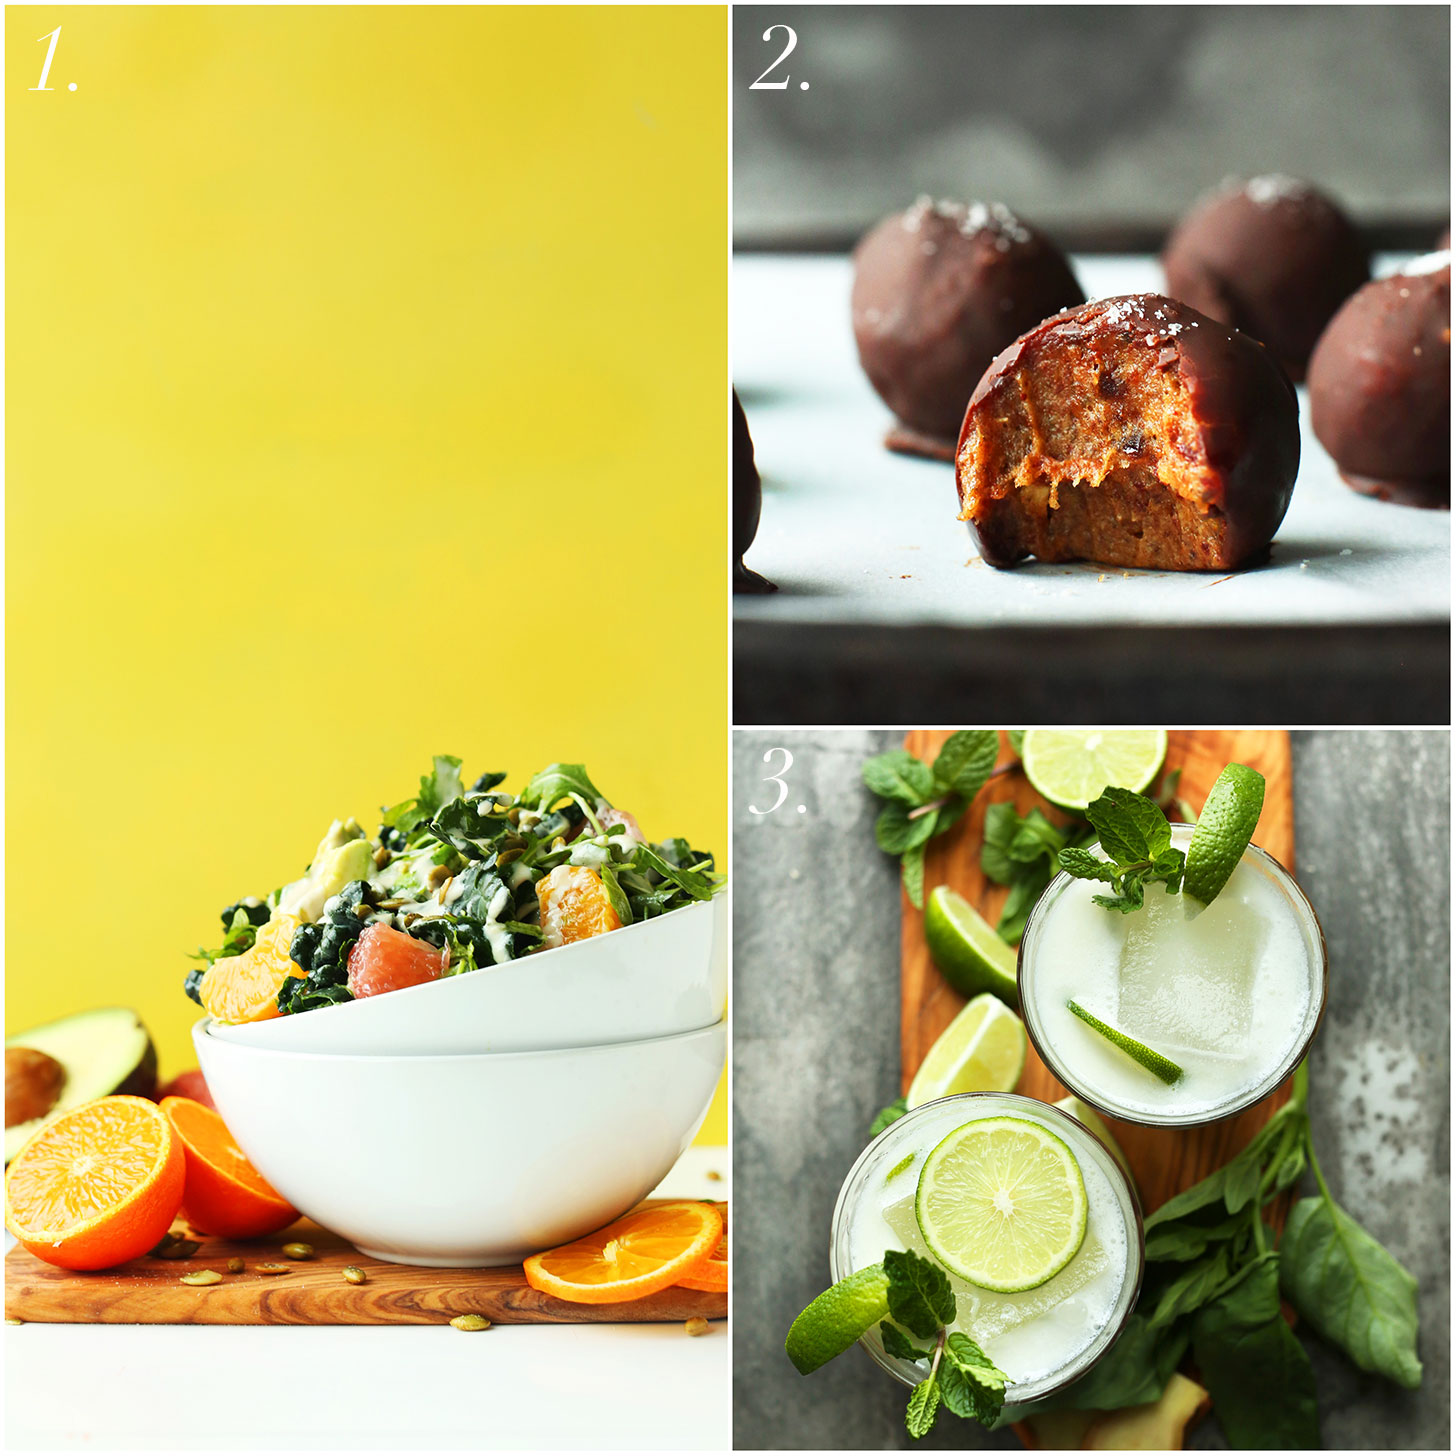 Three recipe photos for free with Everyday Cooking cookbook purchase